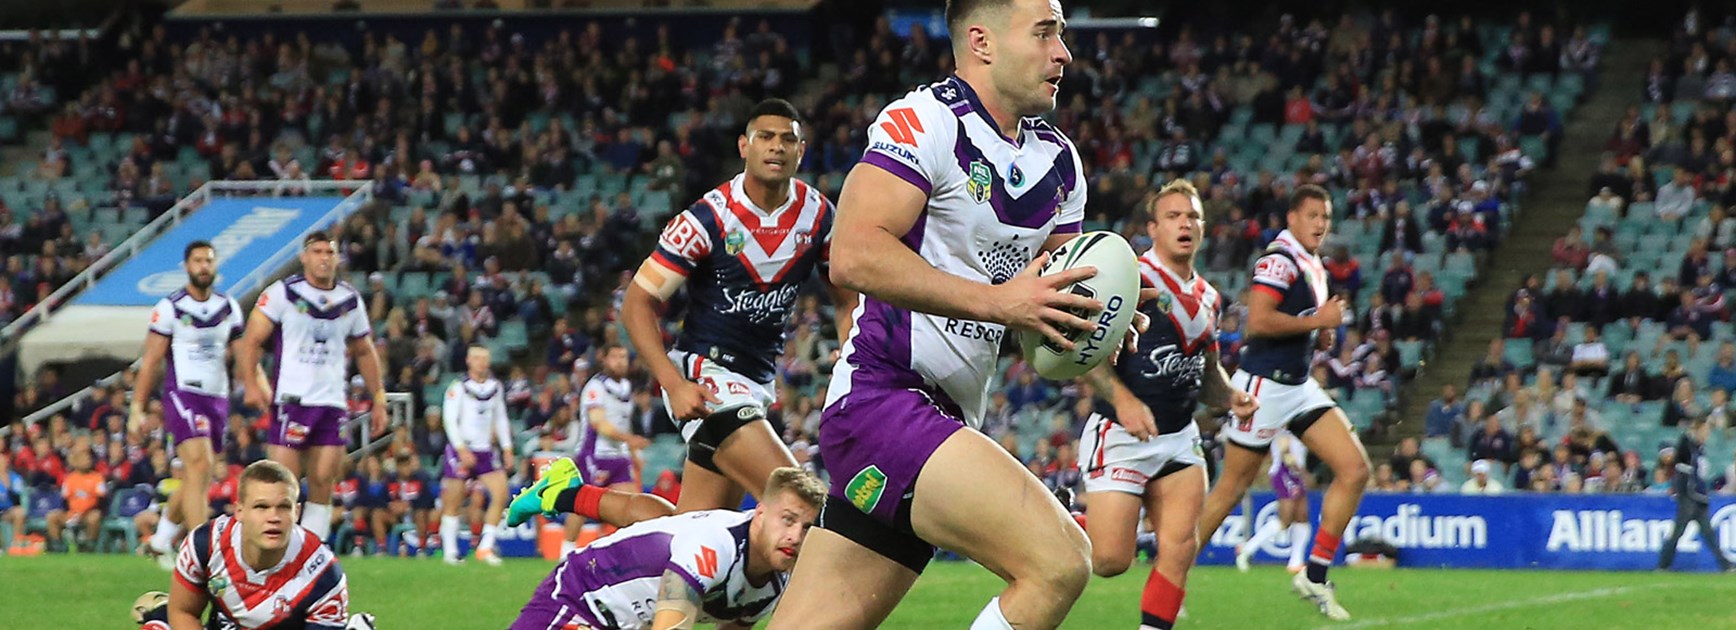 Storm centre Ryan Morgan made two line breaks against the Roosters in Round 14.